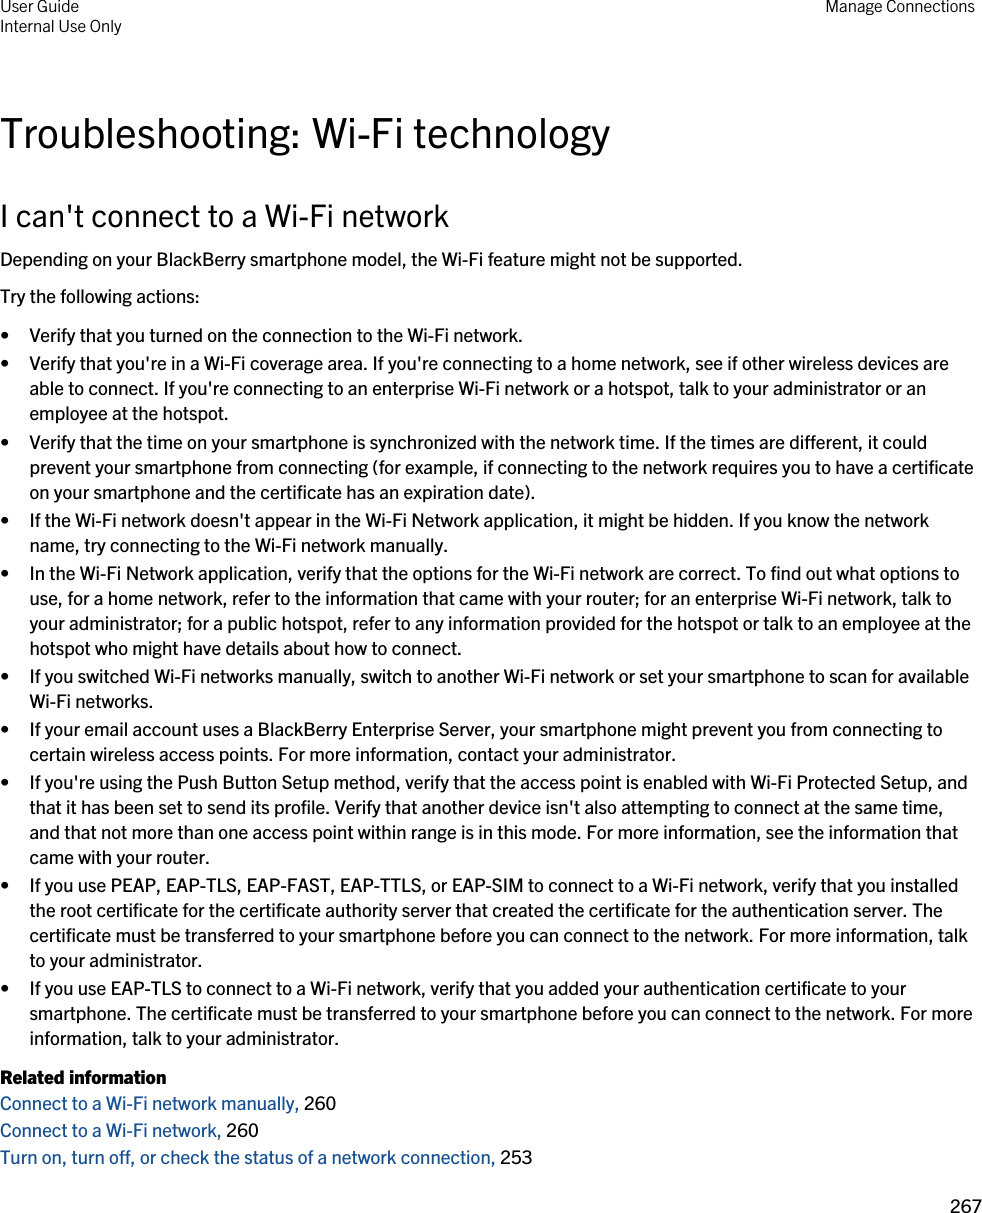 Troubleshooting: Wi-Fi technologyI can&apos;t connect to a Wi-Fi networkDepending on your BlackBerry smartphone model, the Wi-Fi feature might not be supported.Try the following actions:• Verify that you turned on the connection to the Wi-Fi network.• Verify that you&apos;re in a Wi-Fi coverage area. If you&apos;re connecting to a home network, see if other wireless devices are able to connect. If you&apos;re connecting to an enterprise Wi-Fi network or a hotspot, talk to your administrator or an employee at the hotspot.• Verify that the time on your smartphone is synchronized with the network time. If the times are different, it could prevent your smartphone from connecting (for example, if connecting to the network requires you to have a certificate on your smartphone and the certificate has an expiration date).• If the Wi-Fi network doesn&apos;t appear in the Wi-Fi Network application, it might be hidden. If you know the network name, try connecting to the Wi-Fi network manually.• In the Wi-Fi Network application, verify that the options for the Wi-Fi network are correct. To find out what options to use, for a home network, refer to the information that came with your router; for an enterprise Wi-Fi network, talk to your administrator; for a public hotspot, refer to any information provided for the hotspot or talk to an employee at the hotspot who might have details about how to connect.• If you switched Wi-Fi networks manually, switch to another Wi-Fi network or set your smartphone to scan for available Wi-Fi networks.• If your email account uses a BlackBerry Enterprise Server, your smartphone might prevent you from connecting to certain wireless access points. For more information, contact your administrator.• If you&apos;re using the Push Button Setup method, verify that the access point is enabled with Wi-Fi Protected Setup, and that it has been set to send its profile. Verify that another device isn&apos;t also attempting to connect at the same time, and that not more than one access point within range is in this mode. For more information, see the information that came with your router.• If you use PEAP, EAP-TLS, EAP-FAST, EAP-TTLS, or EAP-SIM to connect to a Wi-Fi network, verify that you installed the root certificate for the certificate authority server that created the certificate for the authentication server. The certificate must be transferred to your smartphone before you can connect to the network. For more information, talk to your administrator.• If you use EAP-TLS to connect to a Wi-Fi network, verify that you added your authentication certificate to your smartphone. The certificate must be transferred to your smartphone before you can connect to the network. For more information, talk to your administrator.Related informationConnect to a Wi-Fi network manually, 260 Connect to a Wi-Fi network, 260 Turn on, turn off, or check the status of a network connection, 253 User GuideInternal Use Only Manage Connections267 